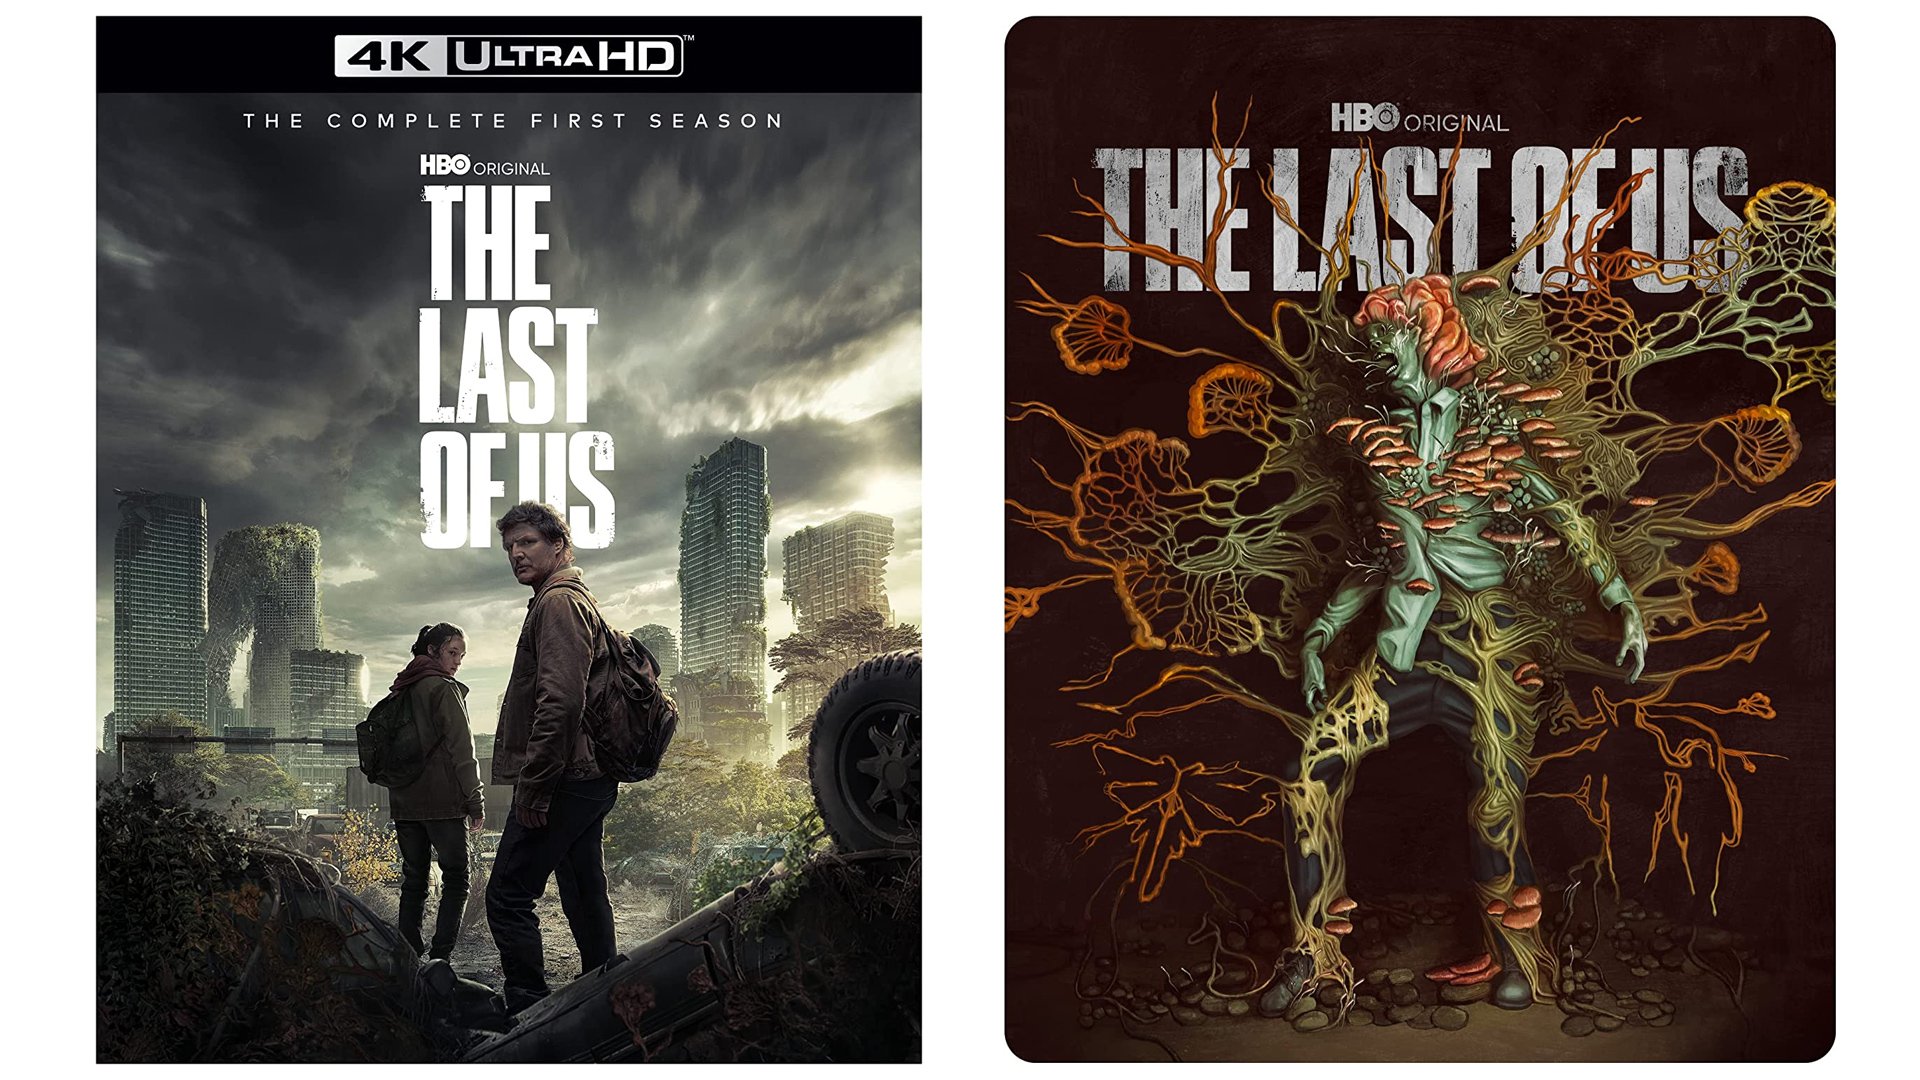 The last of us wallpaper 1920x1080  The last of us, This is us movie, Hbo